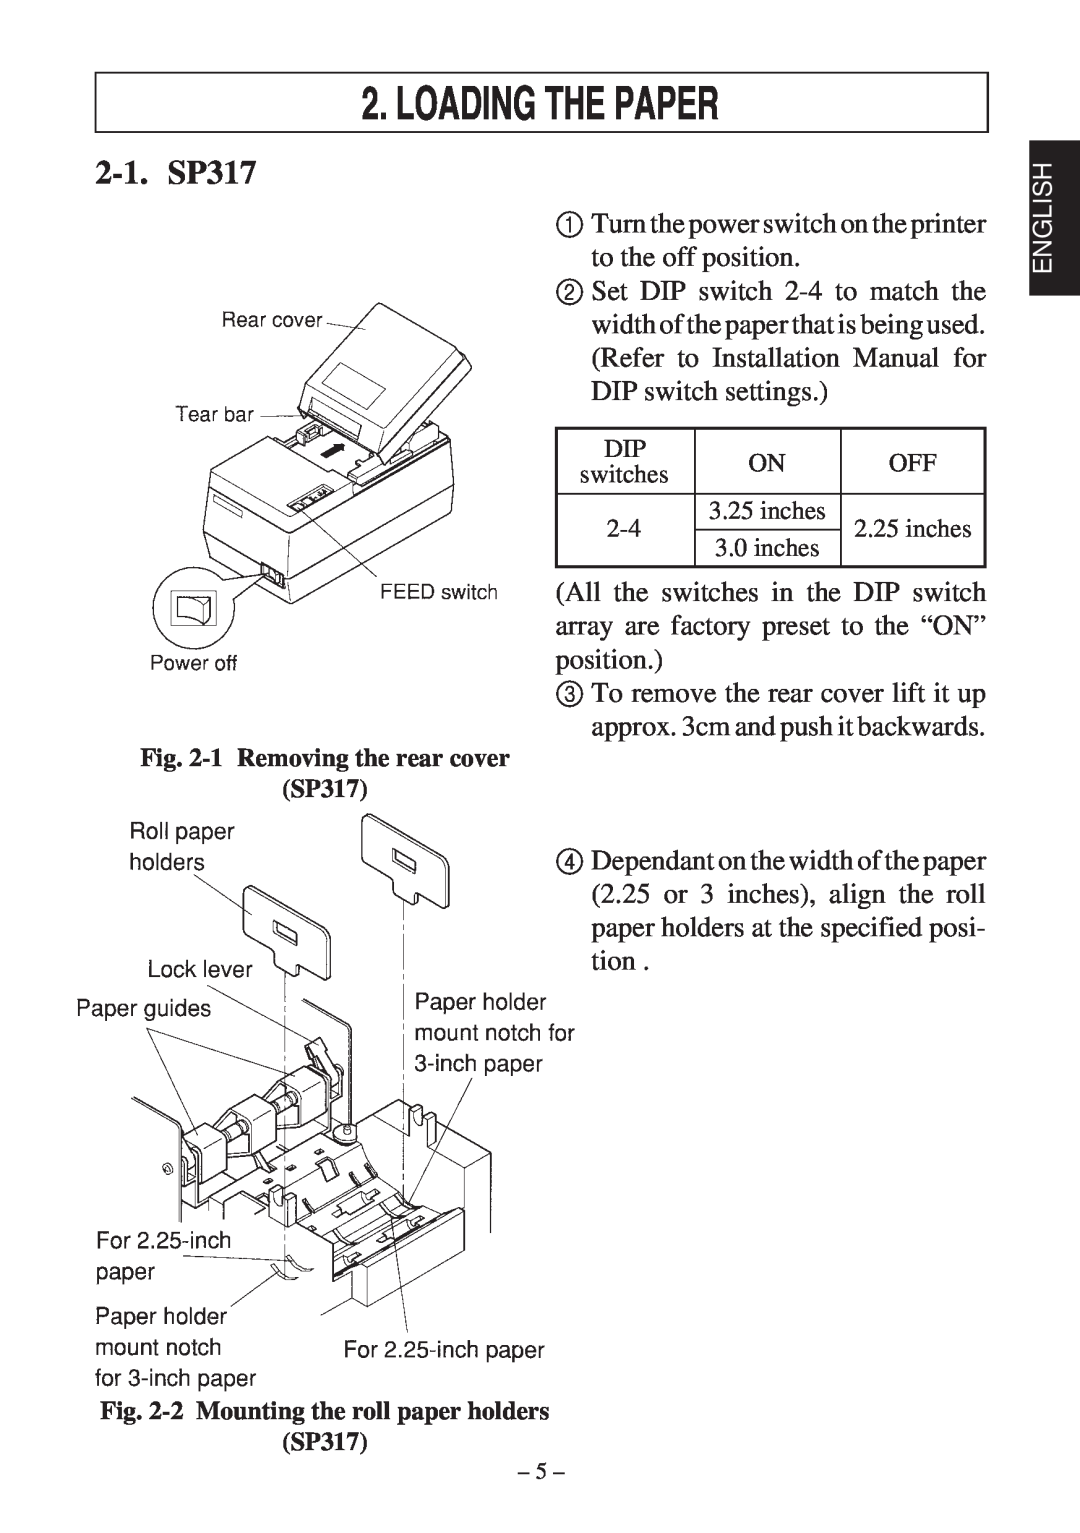 Star Micronics 347F user manual Loading The Paper, 2-1. SP317 